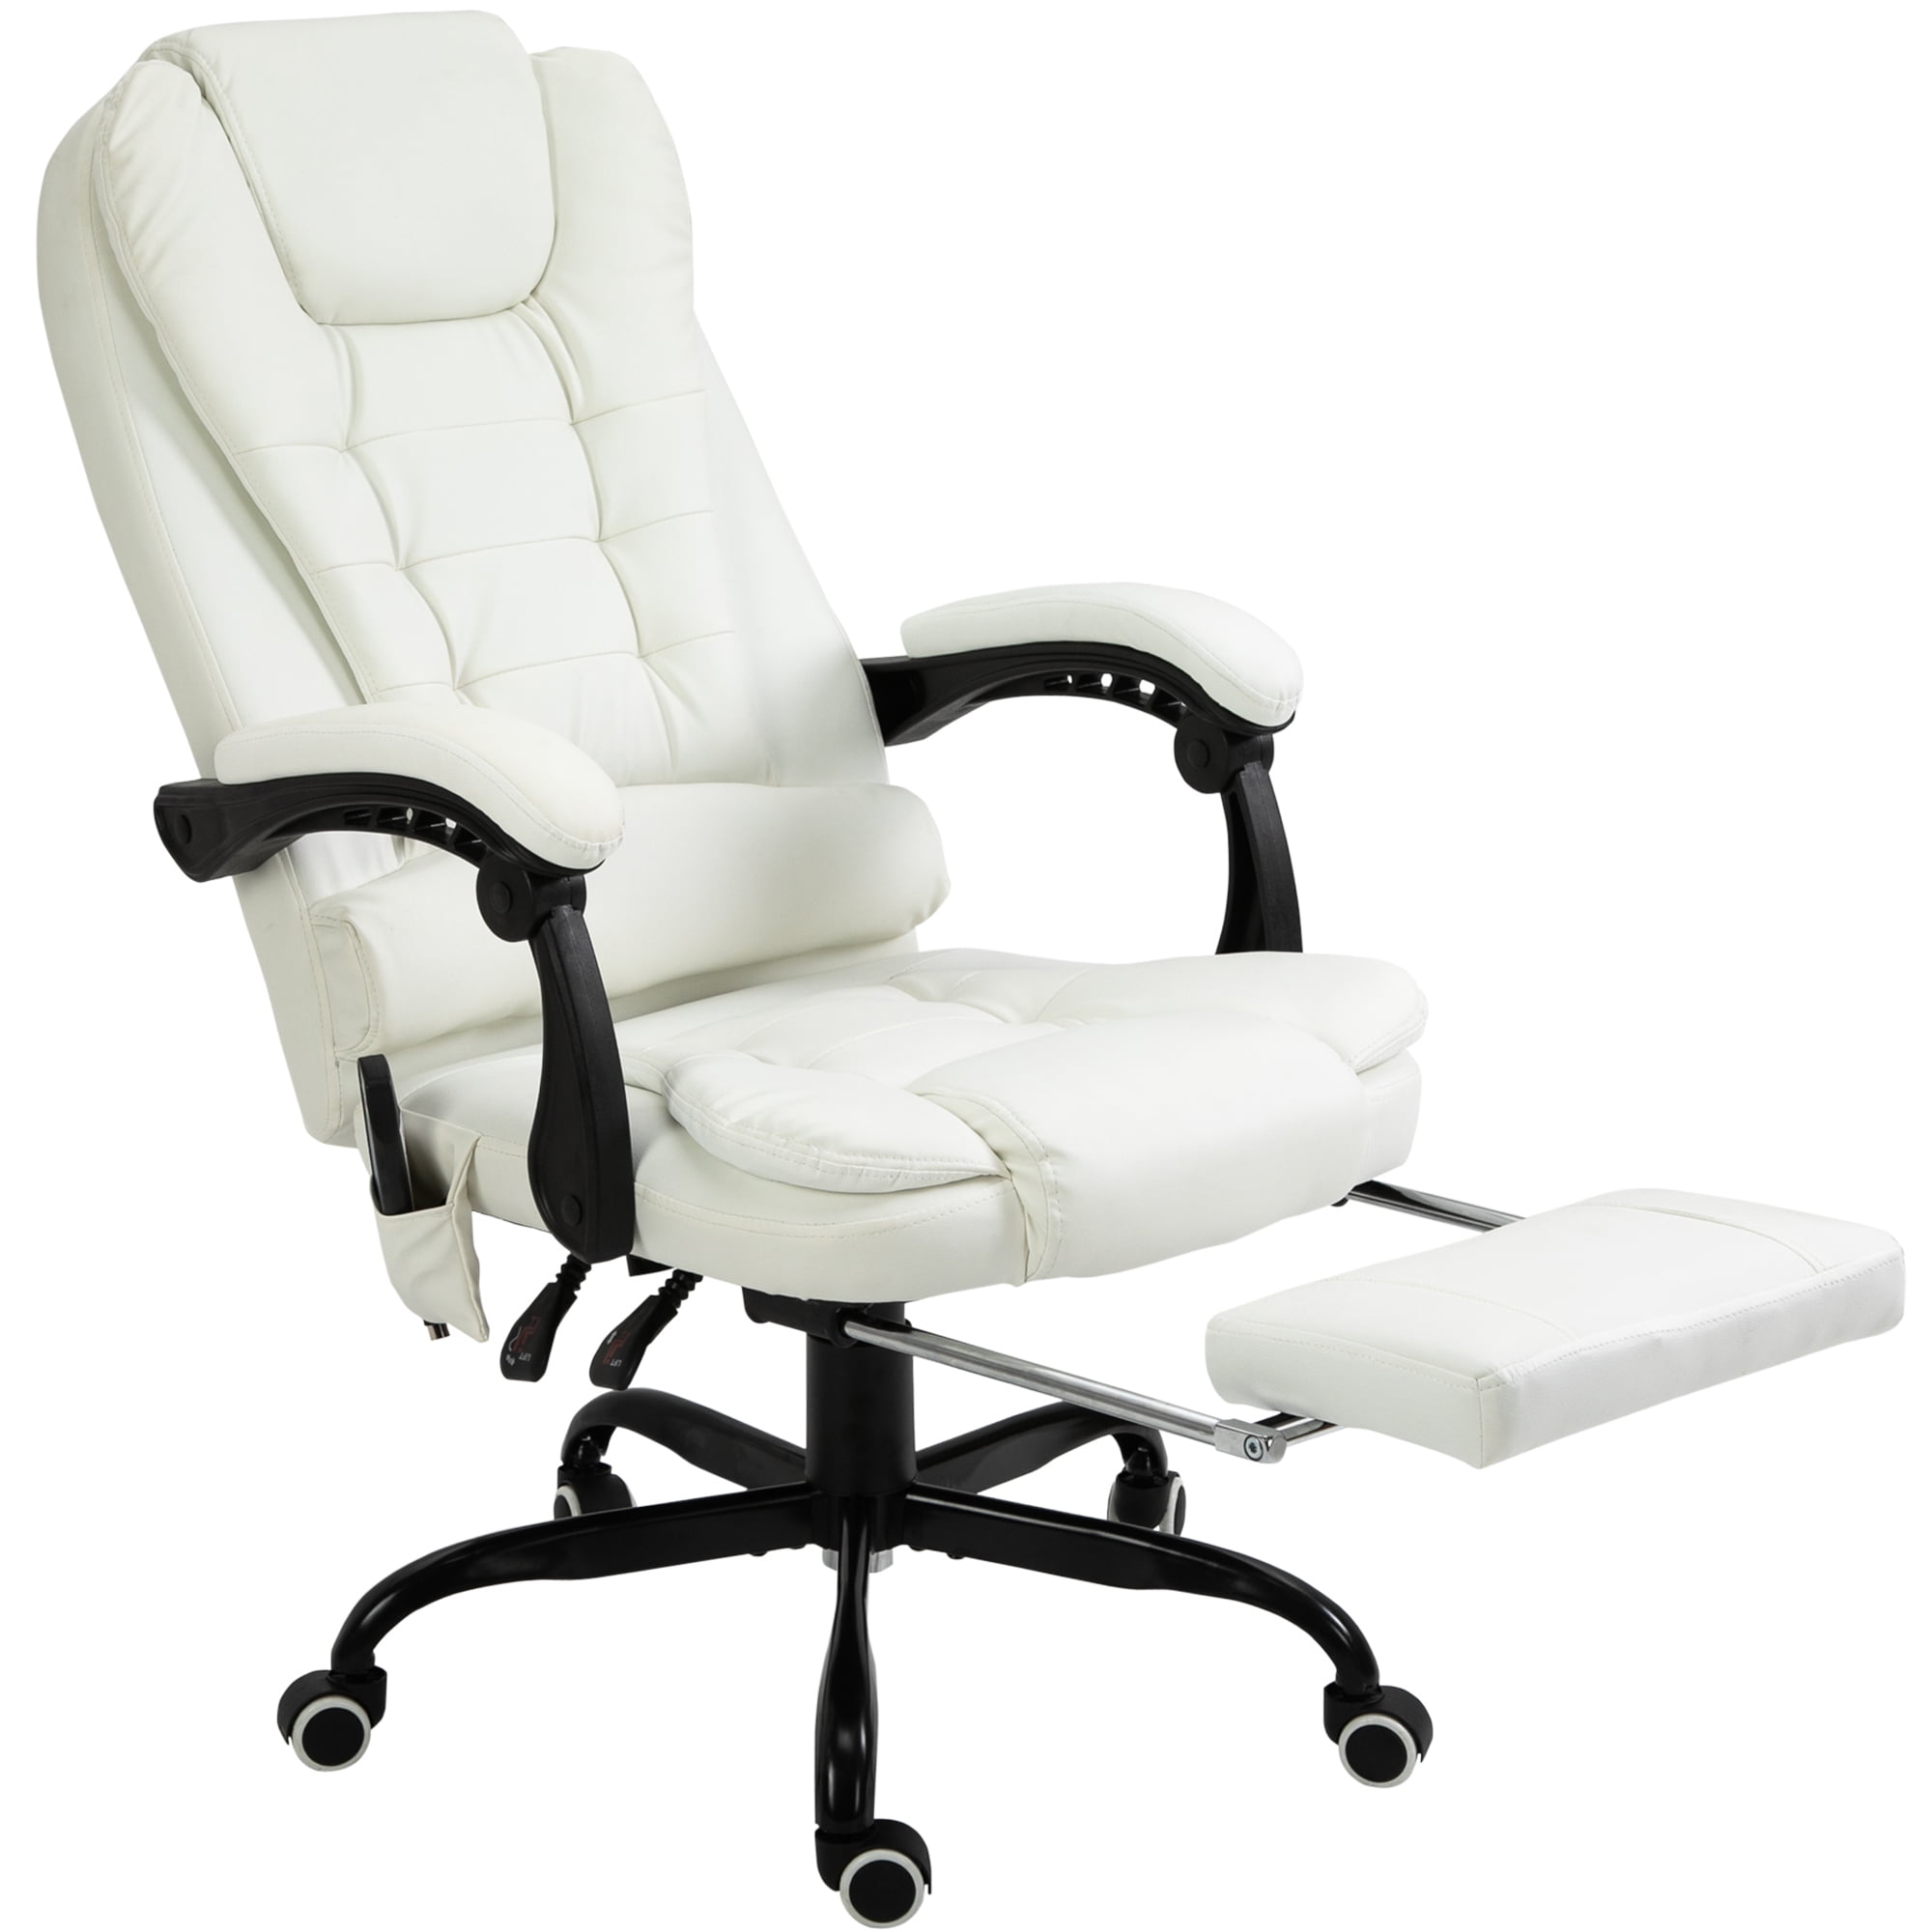 Vibrating Massage Office Chair, Reclining Massage Chair With Heat Function